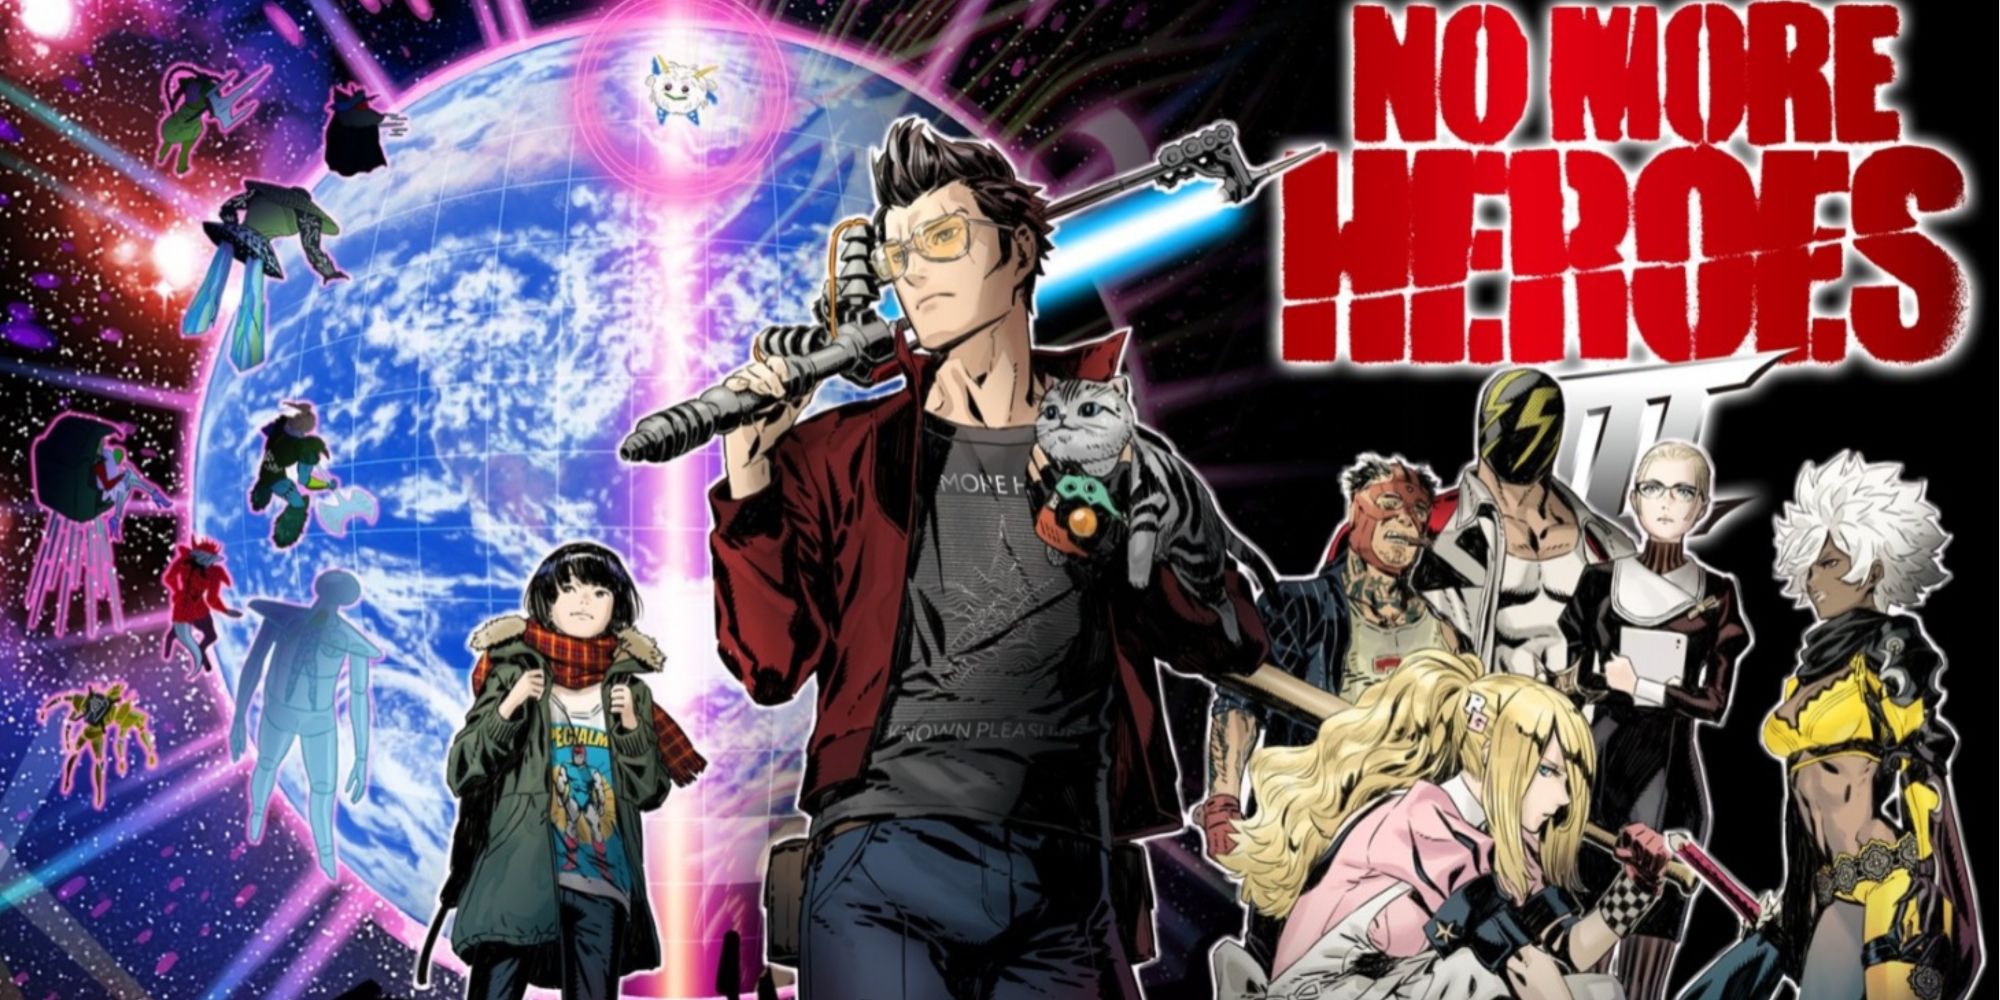 Travis Touchdown with returning characters from previous No More Heroes games